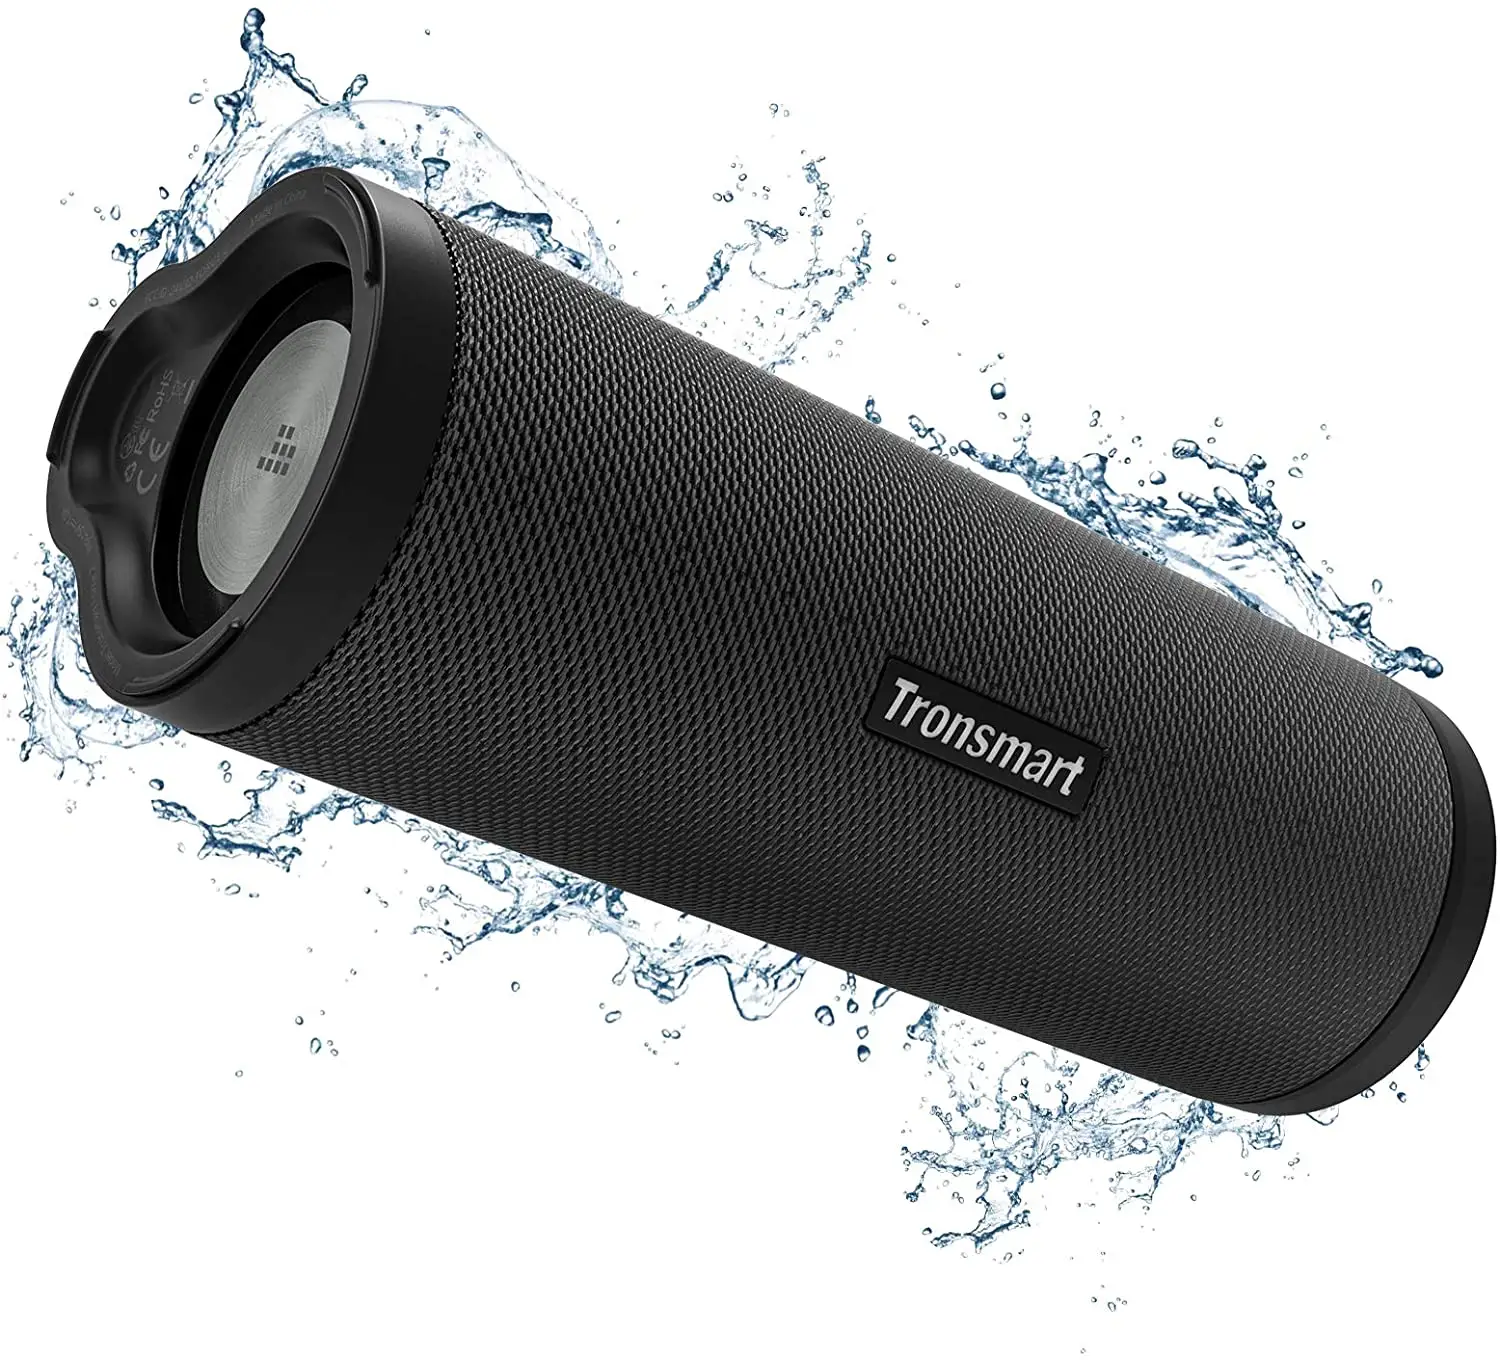 100% Original Tronsmart Force 2 Wireless Speaker 30W Portable Sound with QCC3021 Chip, IPX7 Waterproof, Type-C Fast Charging